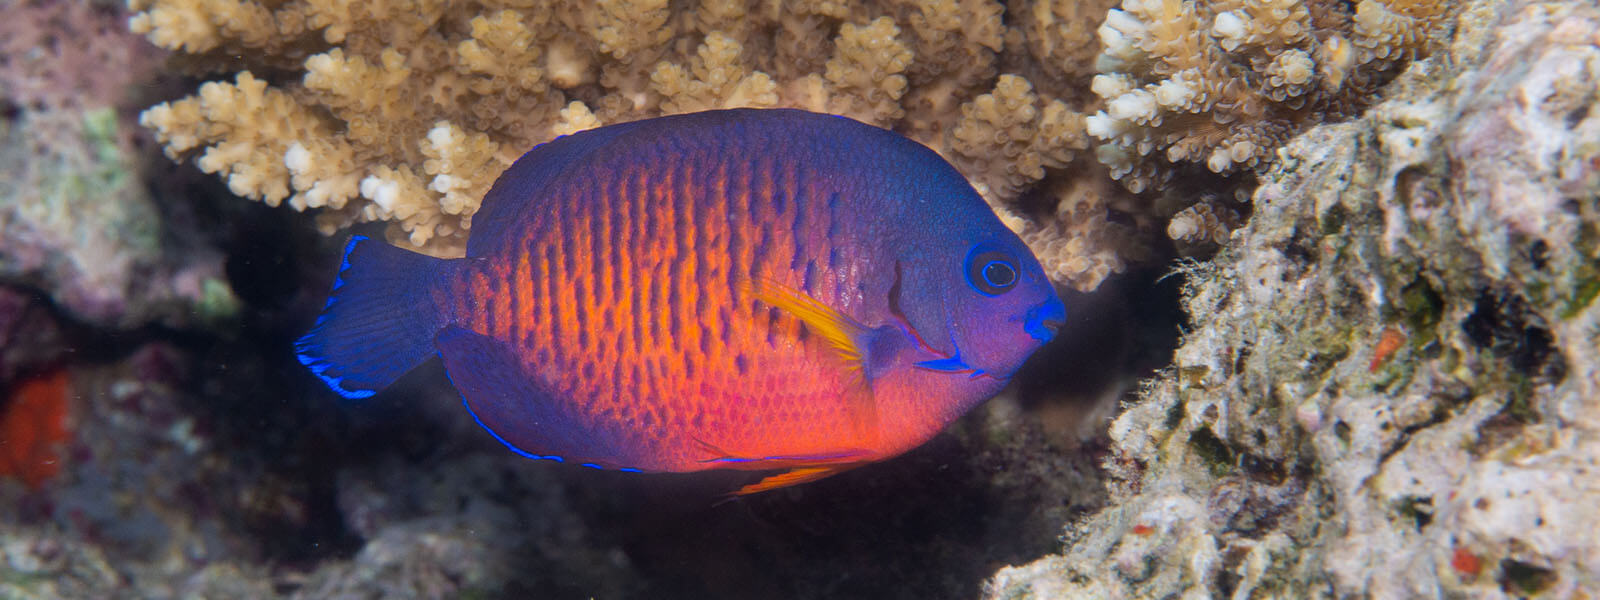 Twin-spine angelfish photographed while snorkeling in Fiji